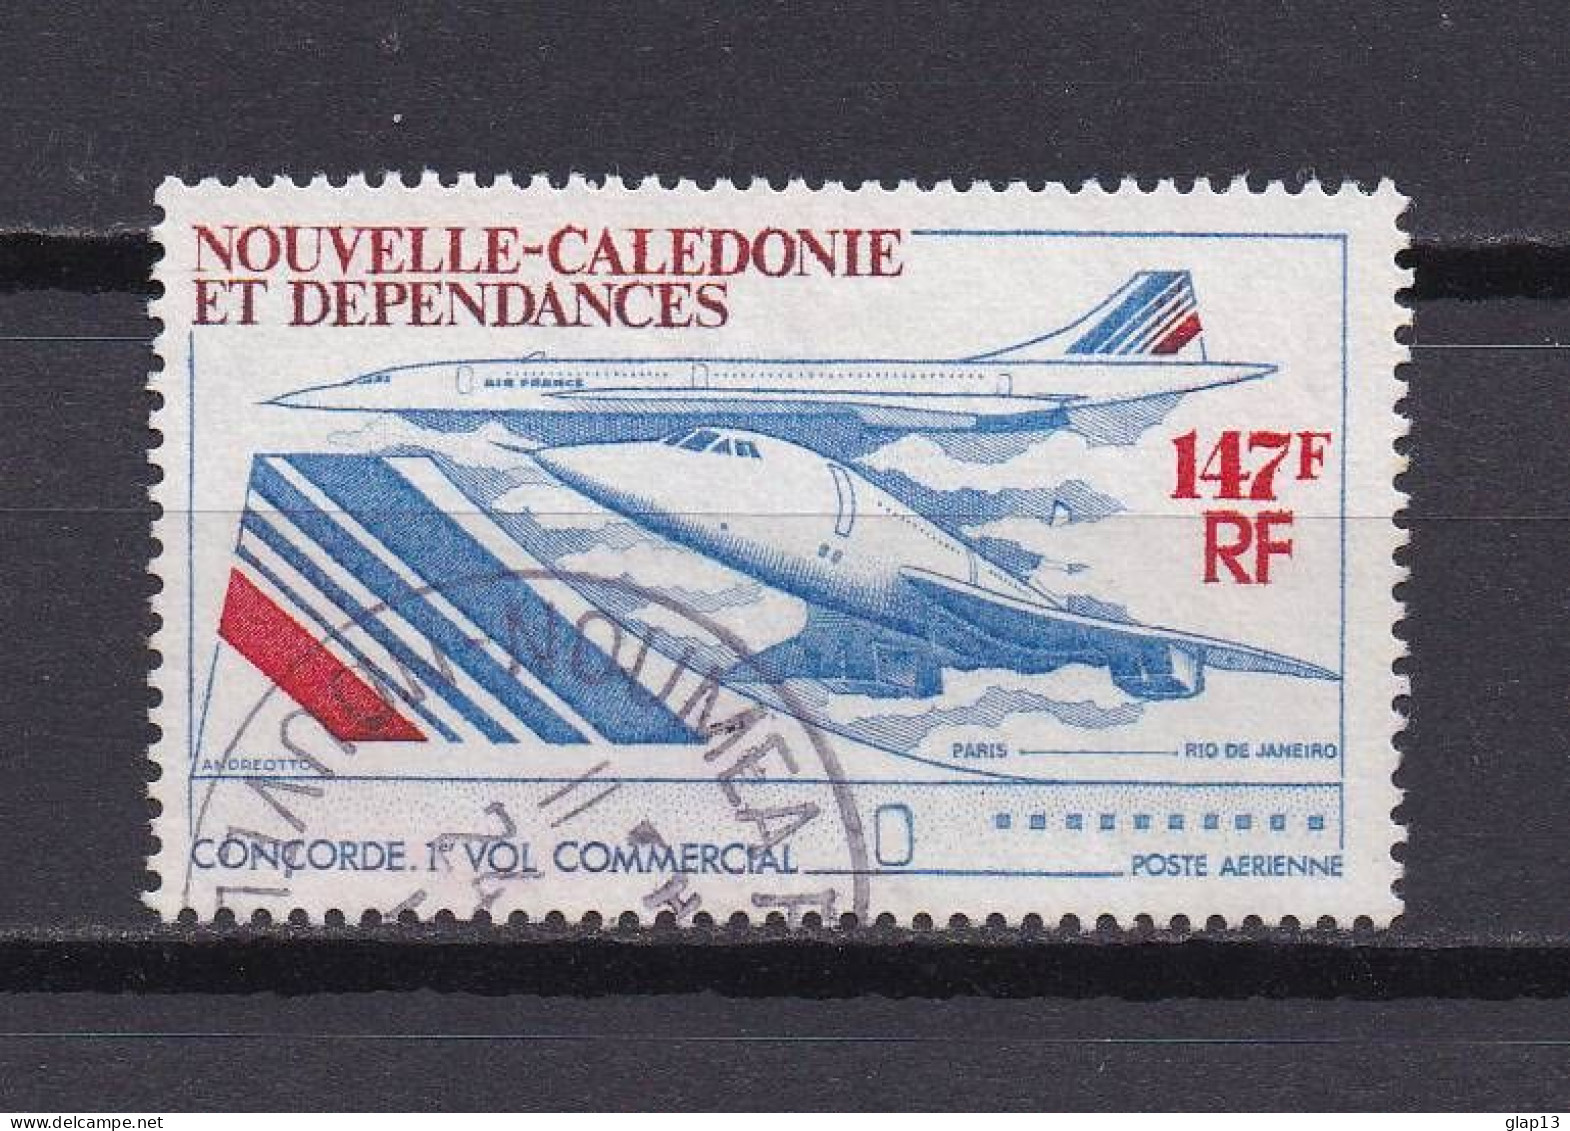 NOUVELLE-CALEDONIE 1976 PA N°169 OBLITERE CONCORDE - Used Stamps